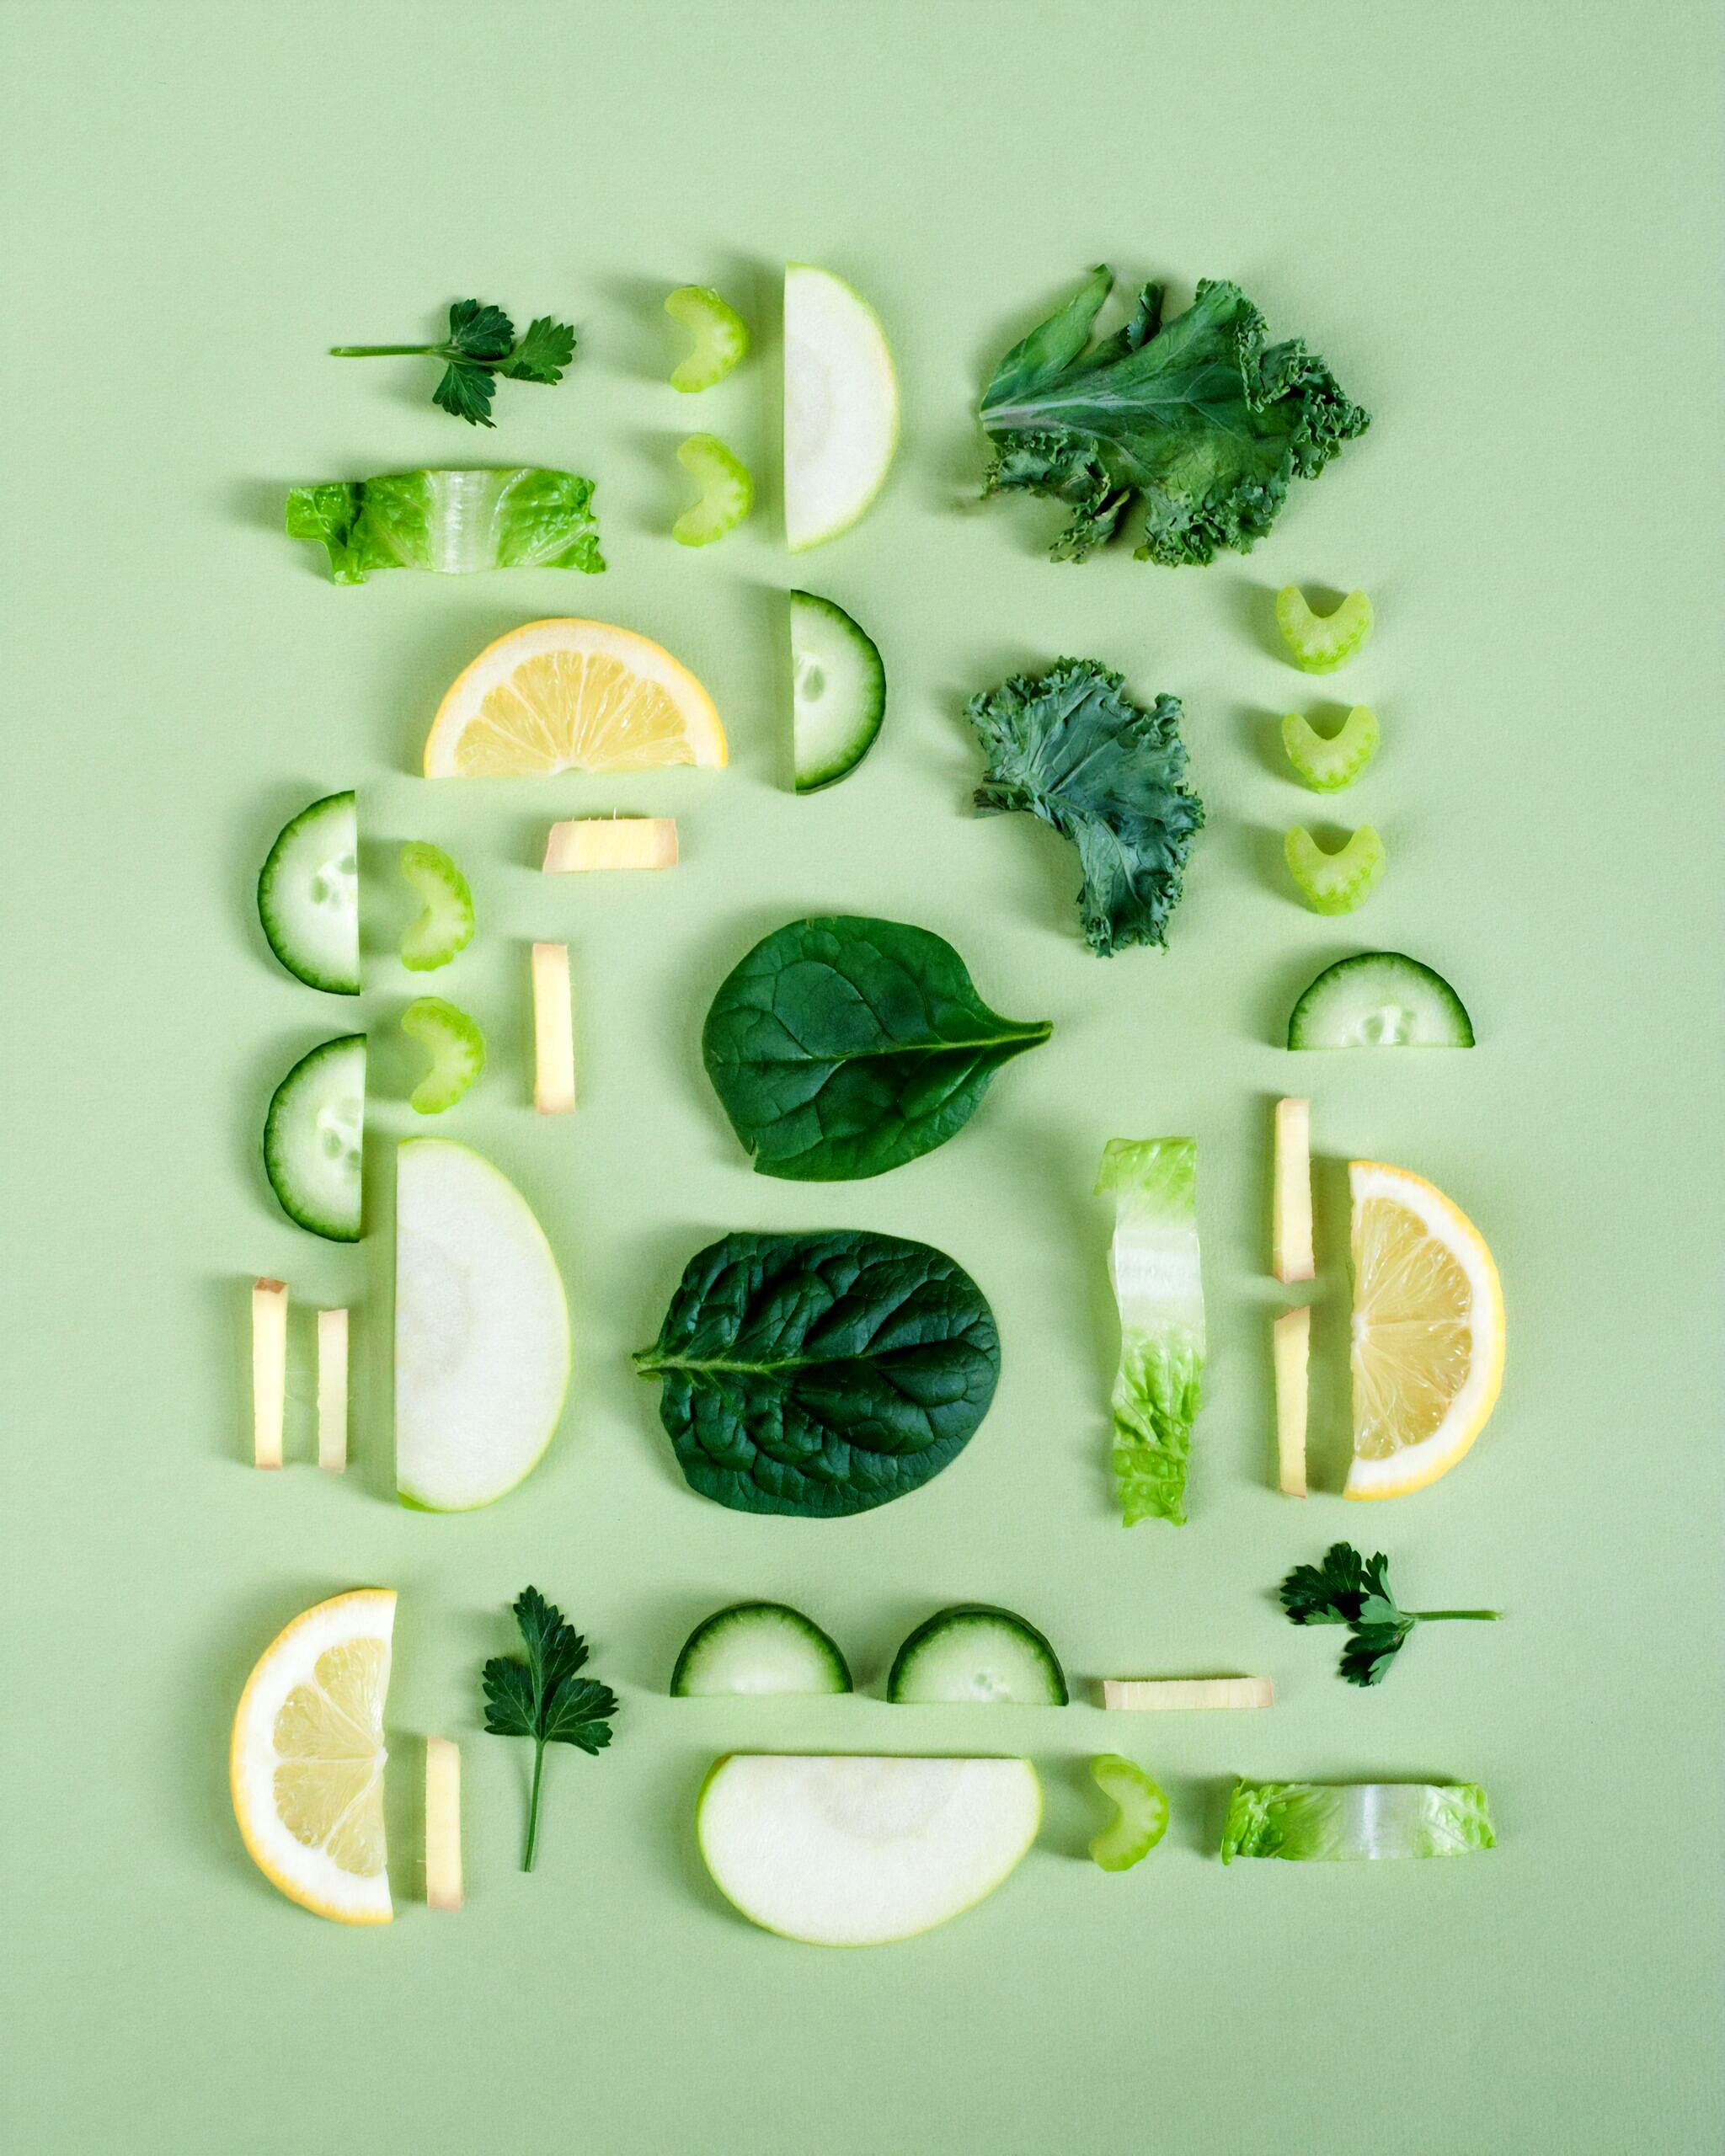 Variety of green vegetables against a green background.